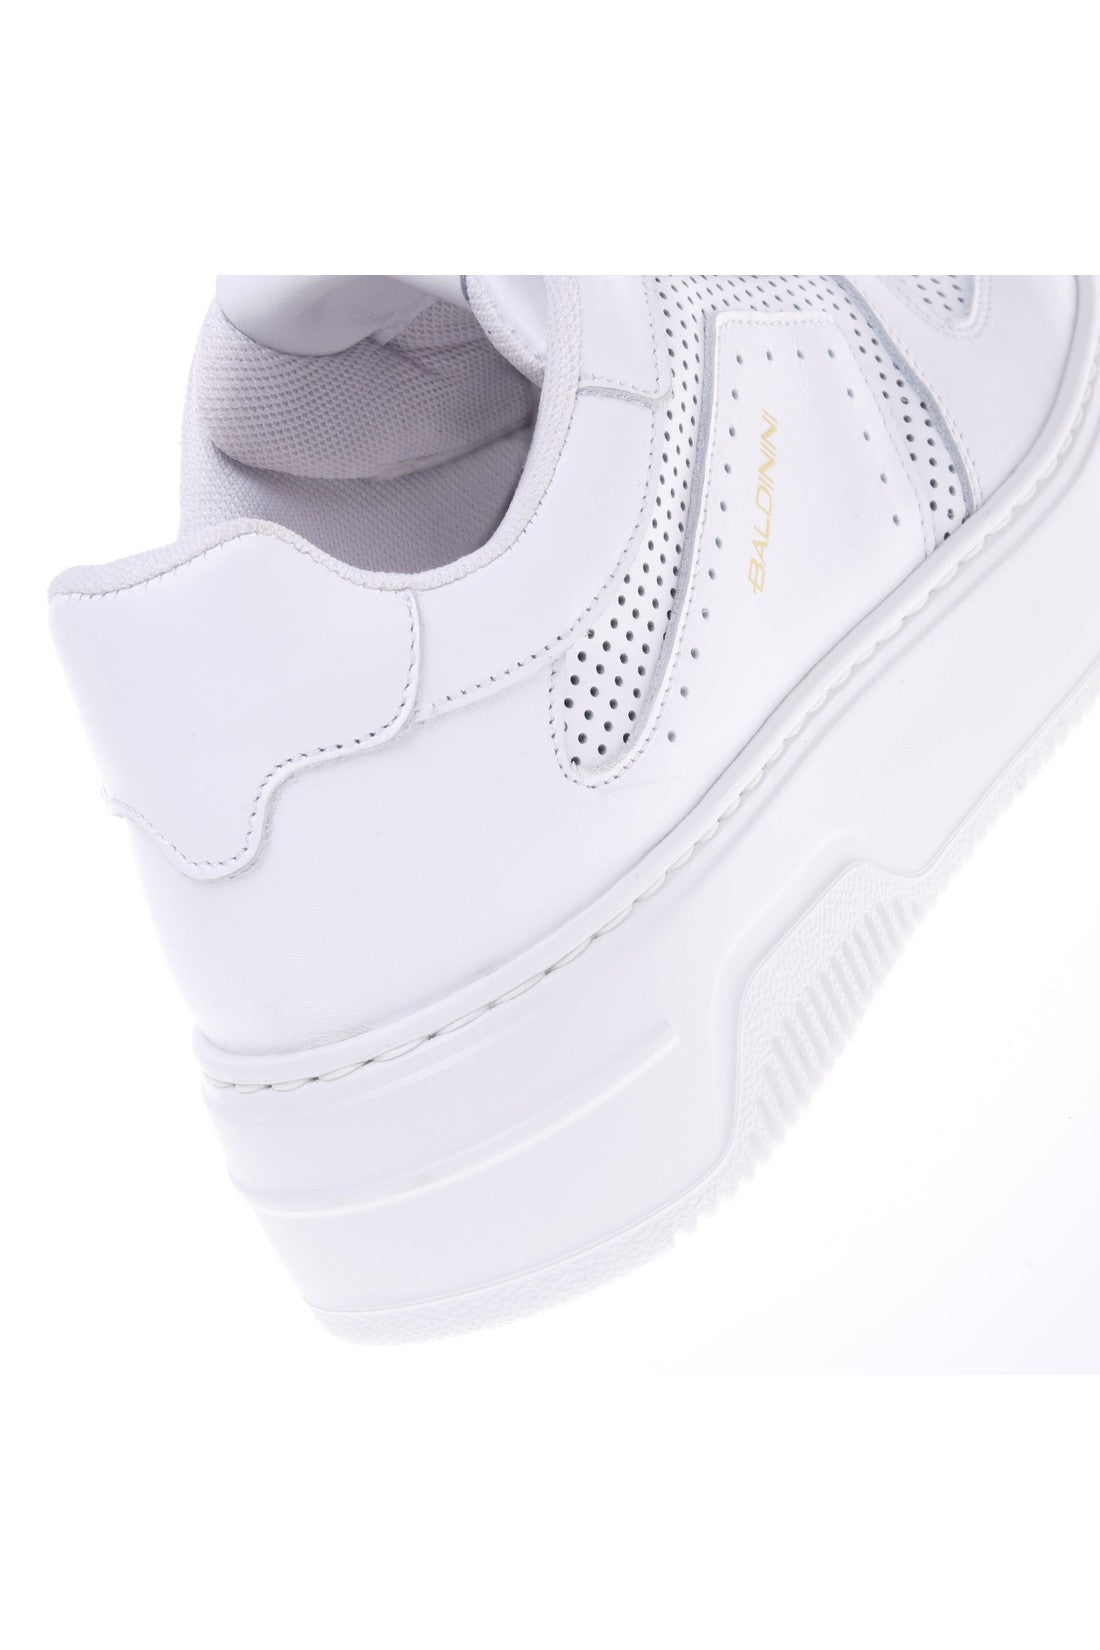 Sneaker in white perforated nappa leather